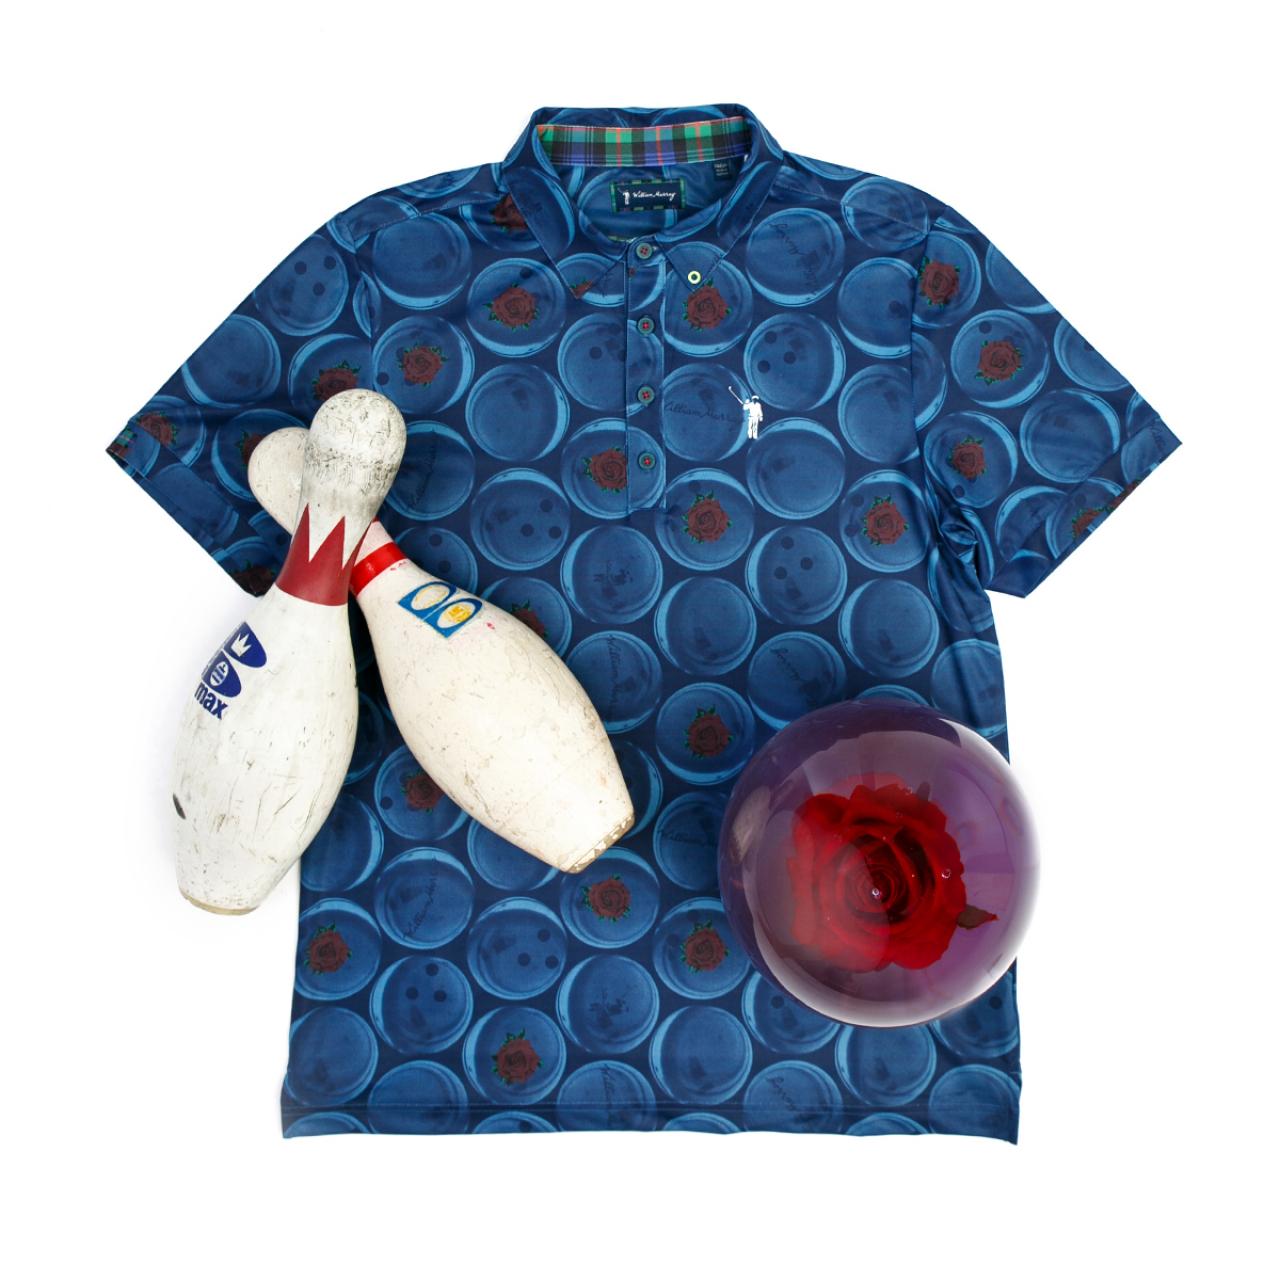 Only Bill Murray could make a bowling shirt perfect for golf